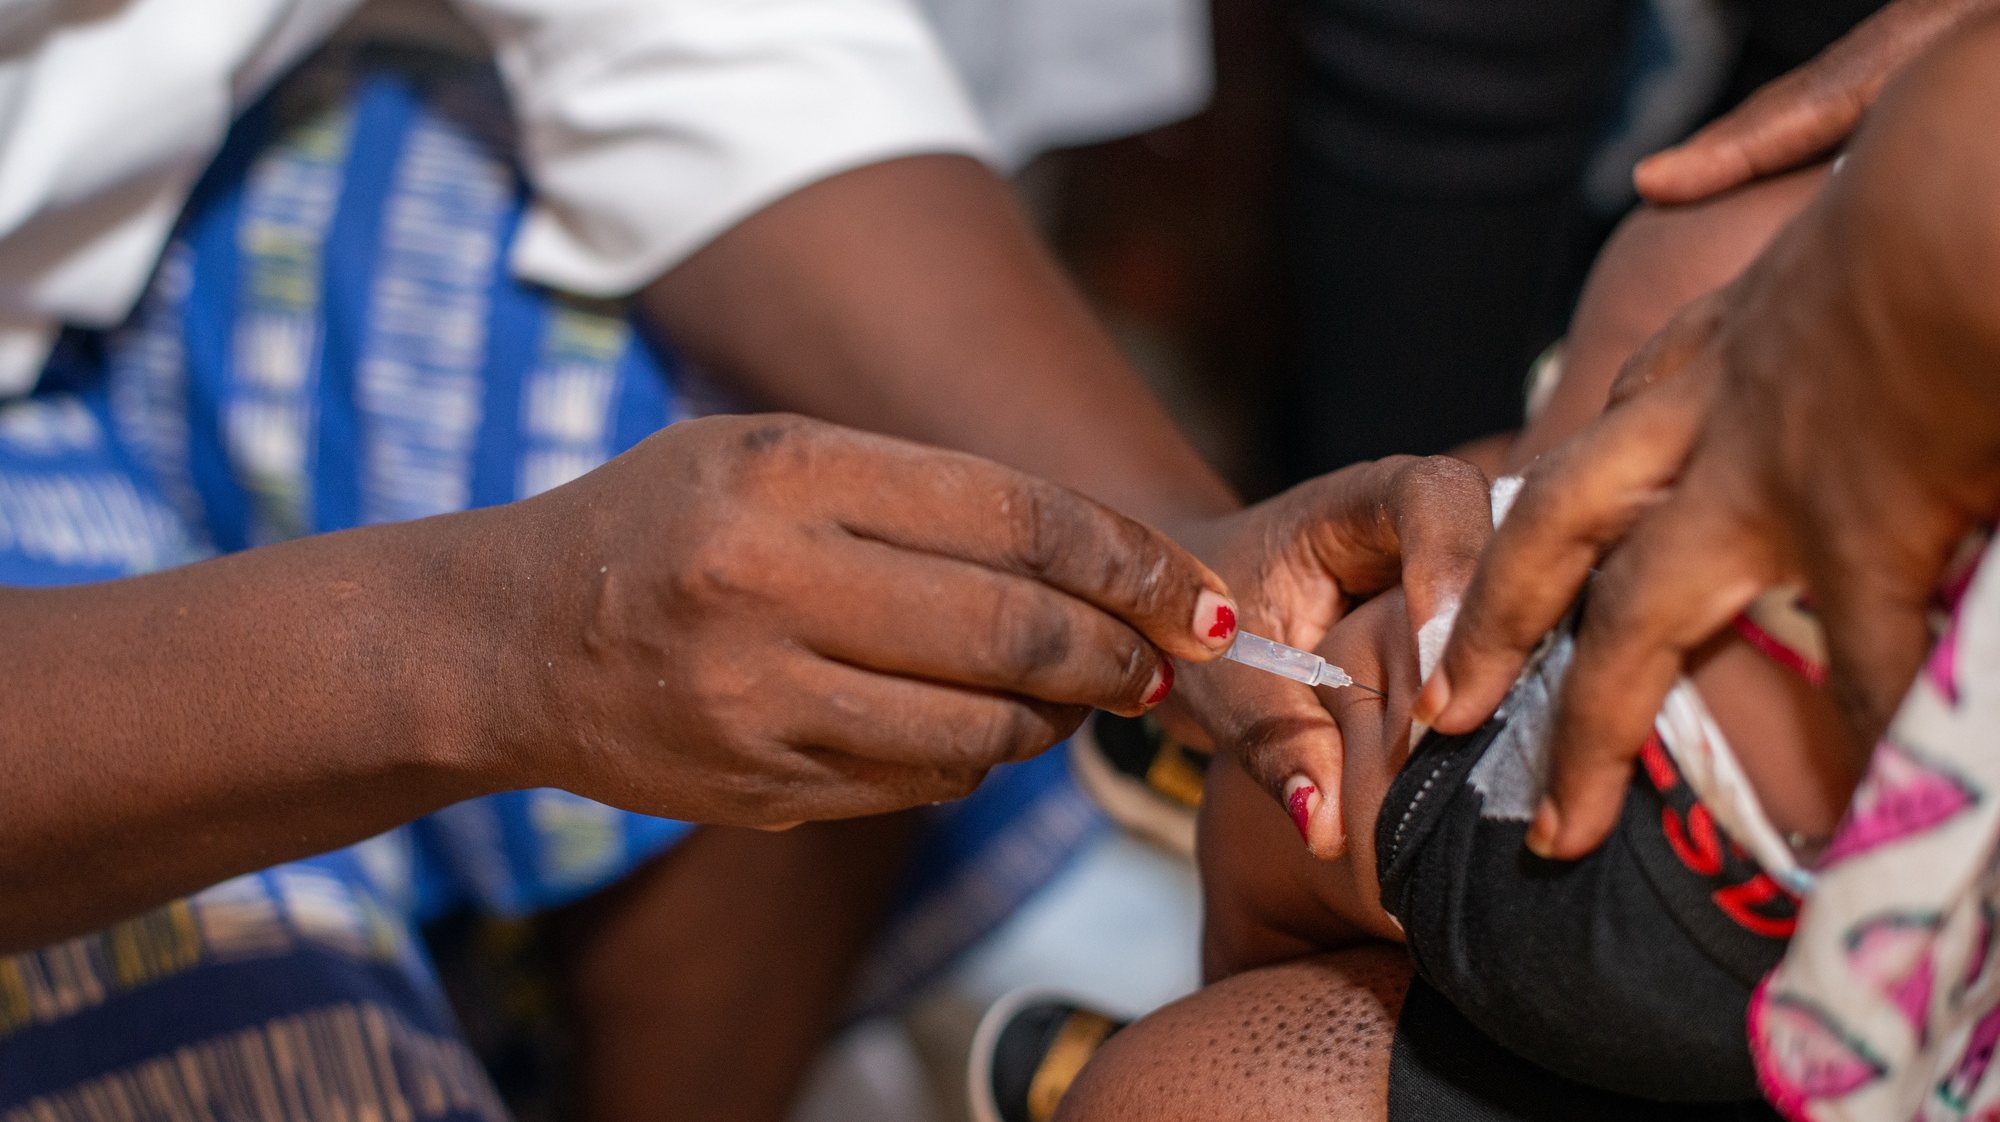 epa11096741 A nurse vaccinates a child against malaria in Nyalla Medical Centre in Douala, Cameroon, 22 January 2024. A new malaria vaccine, known as RTS,S, or Mosquirix, made by GlaxoSmithKline, is being rolled out for the first time as an immunization campaign for children in Cameroon. According to the World Health Organisation, the WHO African Region, with an estimated 233 million cases in 2022, accounted for about 94% of cases globally. Malaria is highly endemic in Cameroon and the WHO estimates that about 11,000 people die from malaria in Cameroon every year.  EPA/DONGMO RODRIGUE WILLIAM